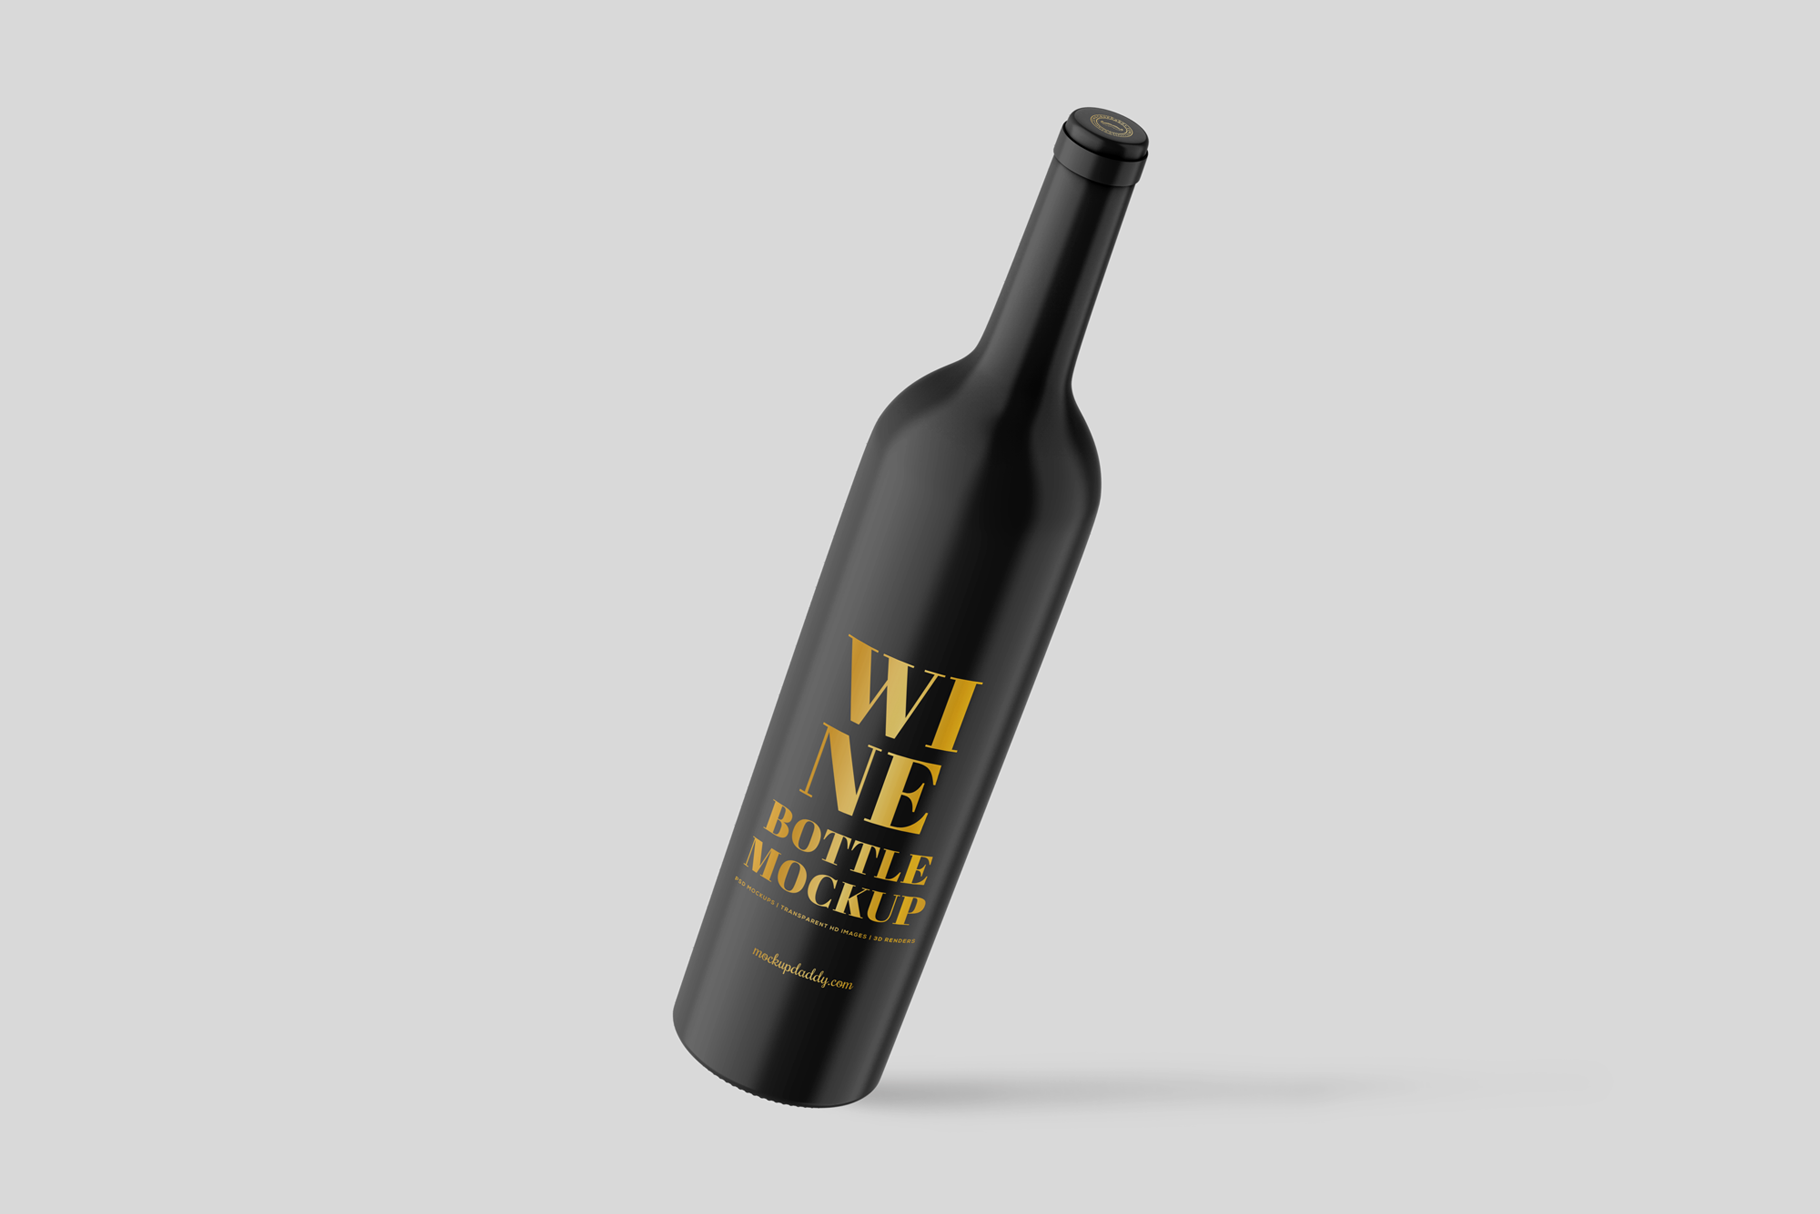  Black Wine Clay Bottle Mockup with golden text